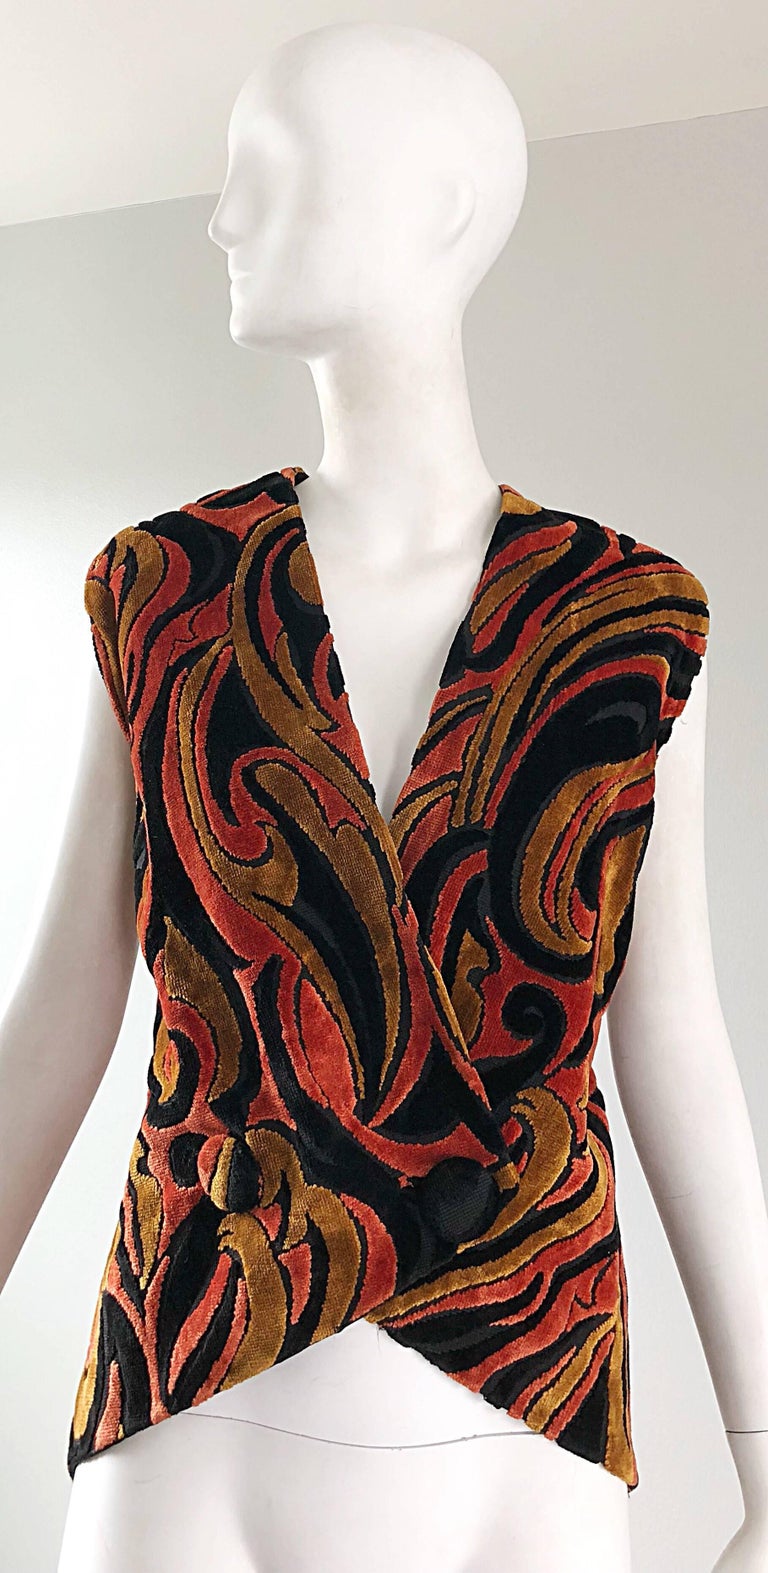 Rare 1950s EISENBERG soft chenille larger size double breasted sleeveless vest! Warm vibrant hues of burnt orange, brown and black. Shorter in the front, with a longer tail in the back. Fabric covered buttons on the front. Fully lined. Wear this